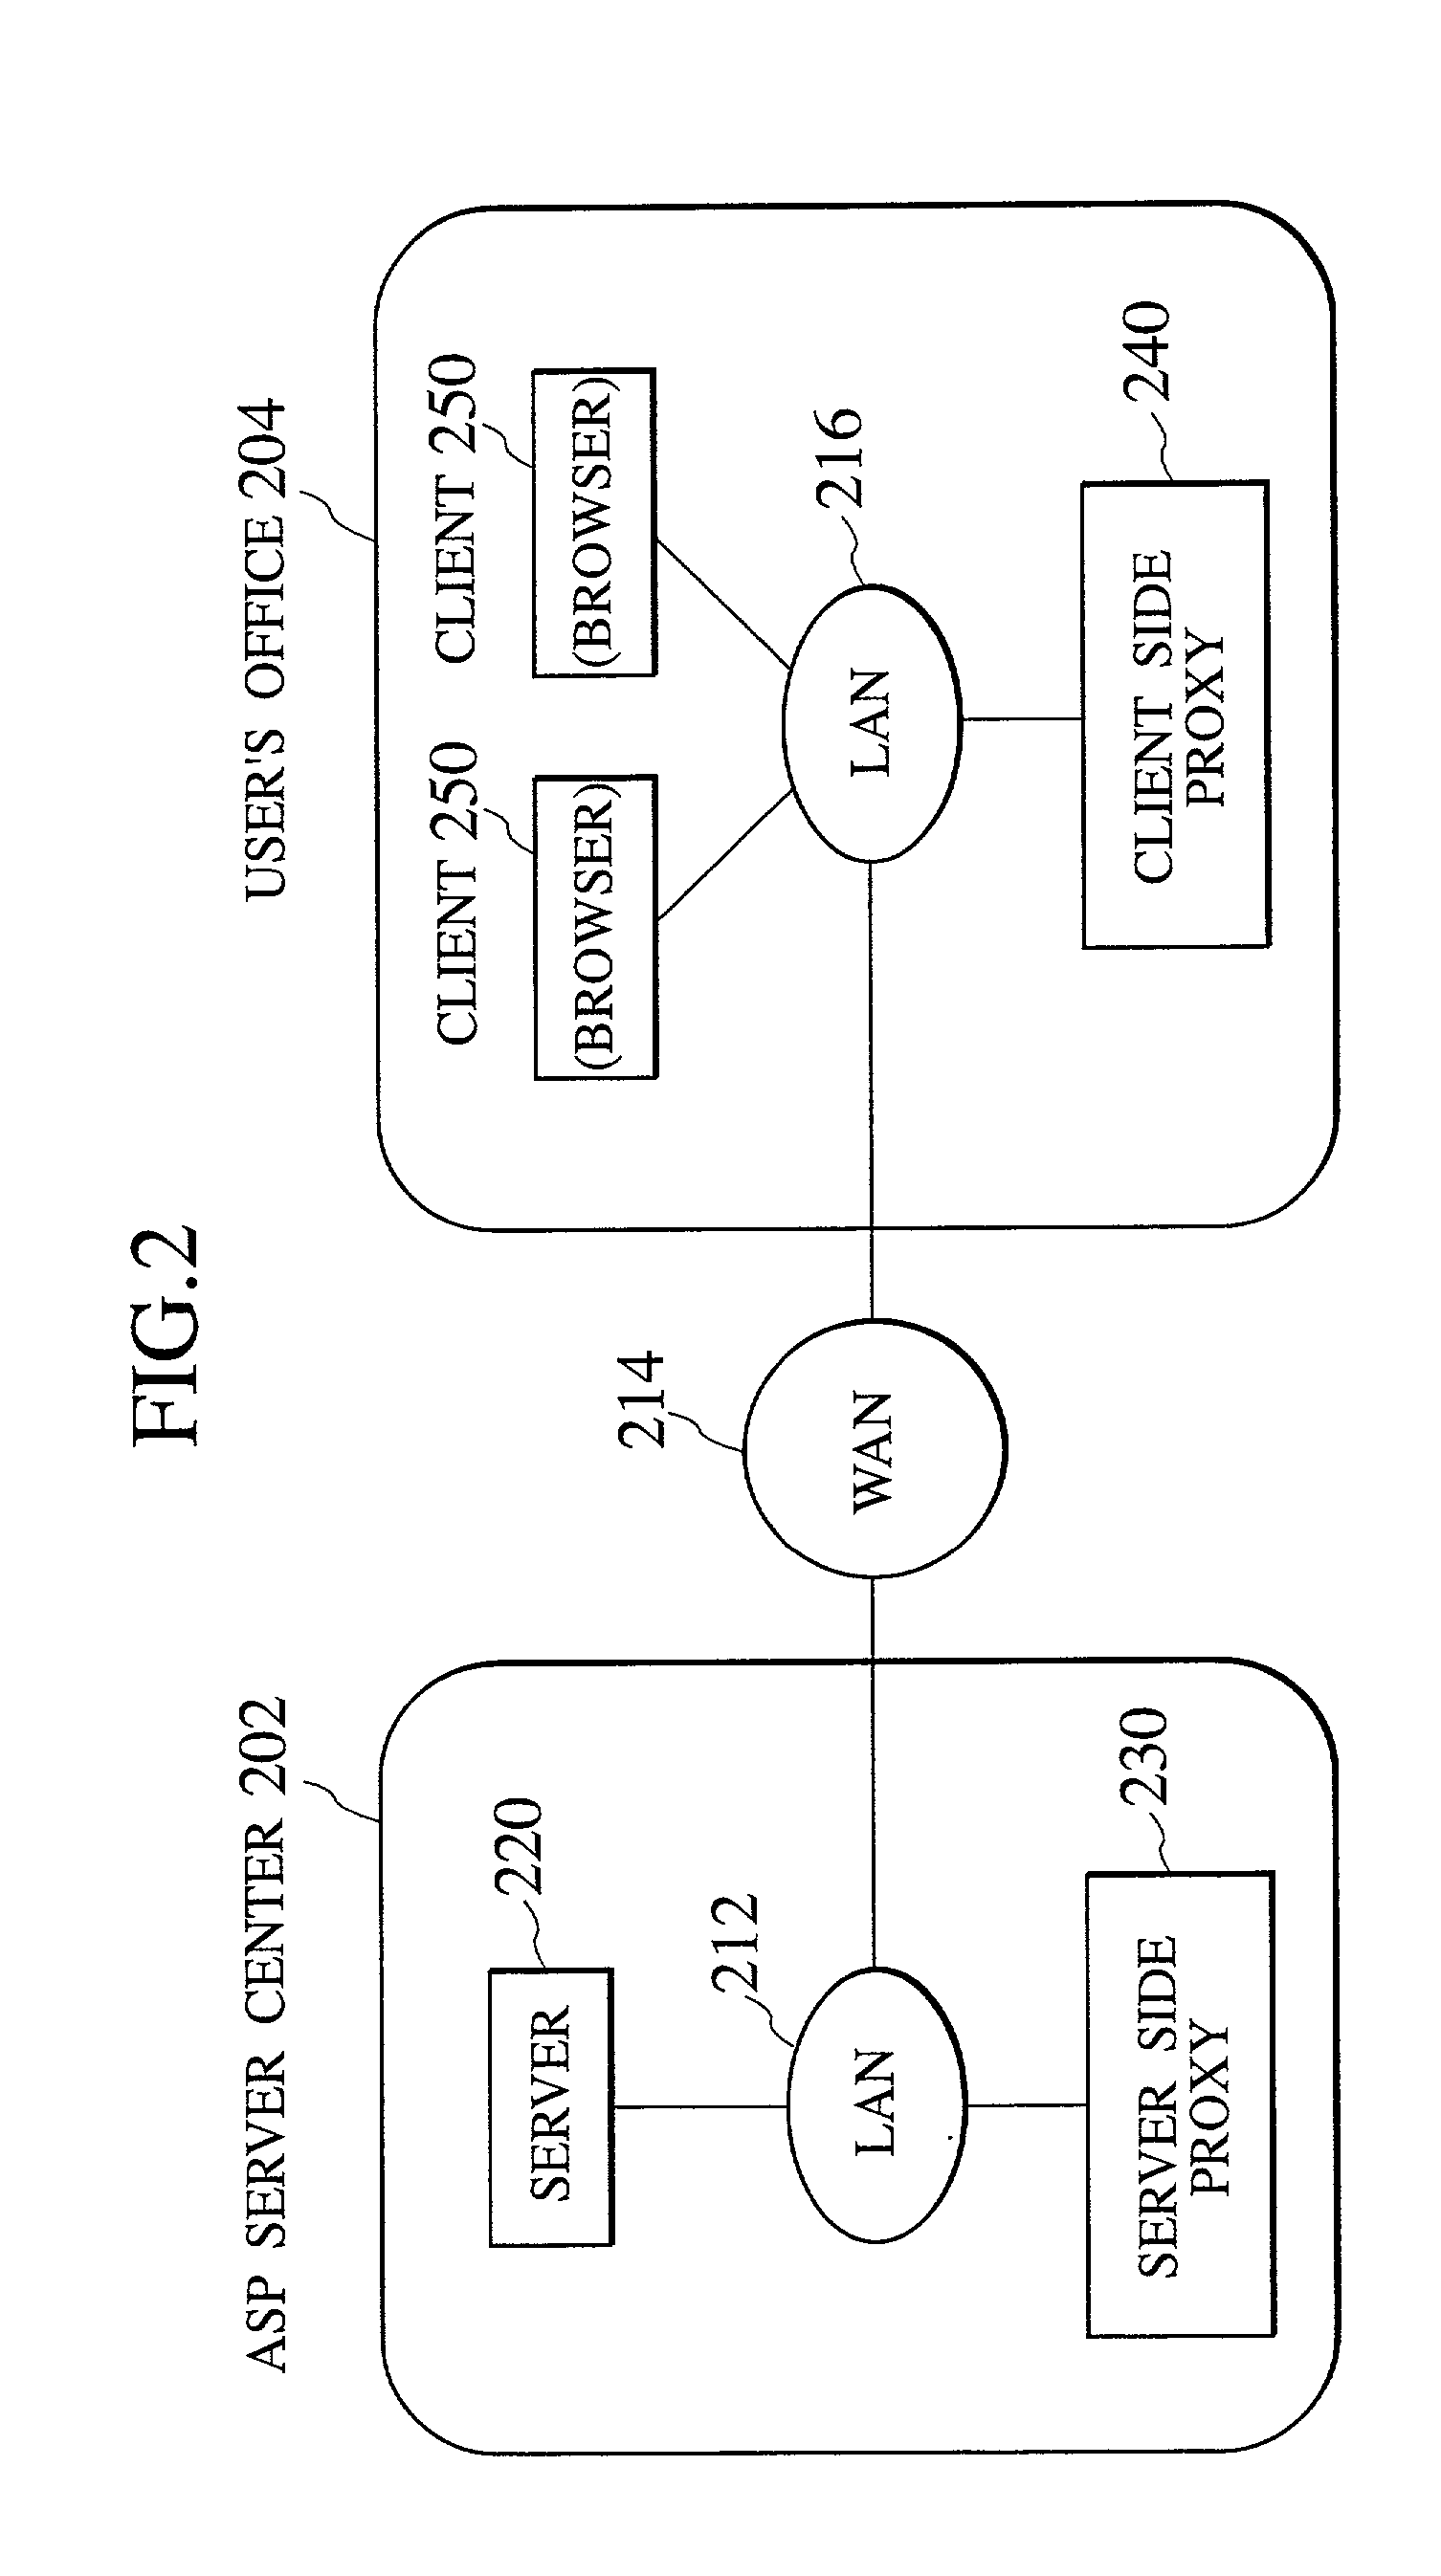 Data transfer scheme using caching and differential compression techniques for reducing network load